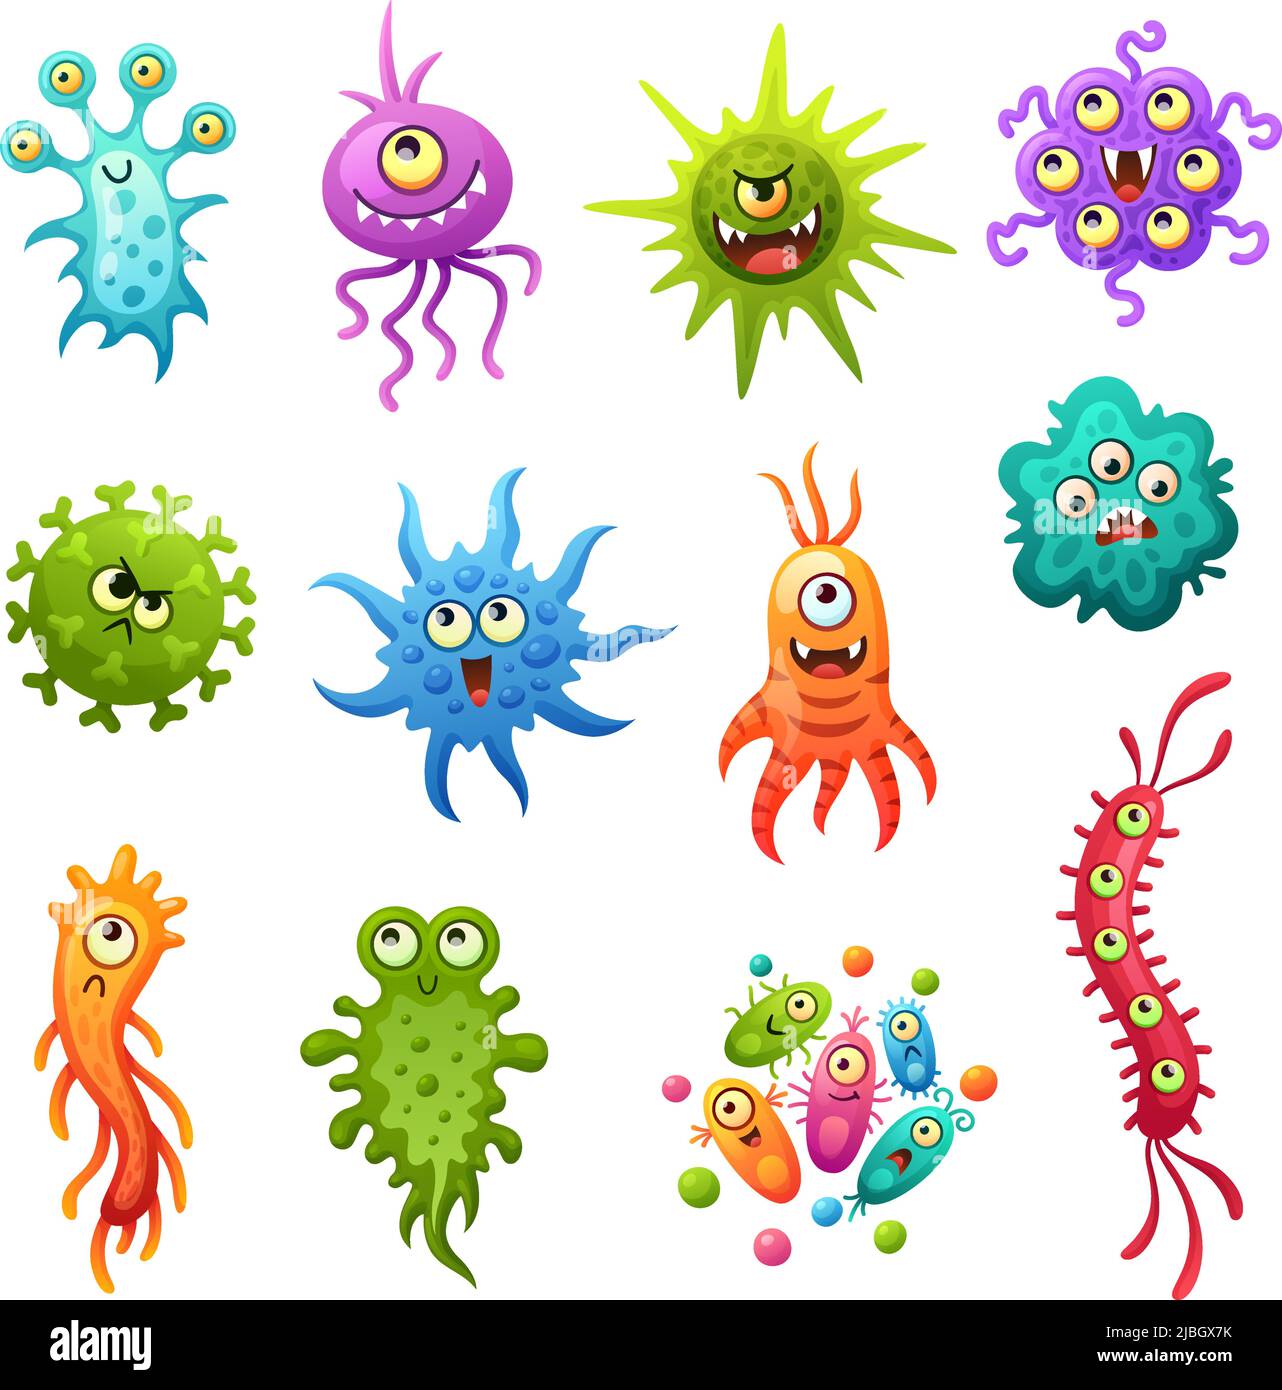 Cartoon viruses. Germs virus character, funny bacteria types. Sick or flu microbes, evil and cute colorful garish monsters. Isolated medical vector Stock Vector